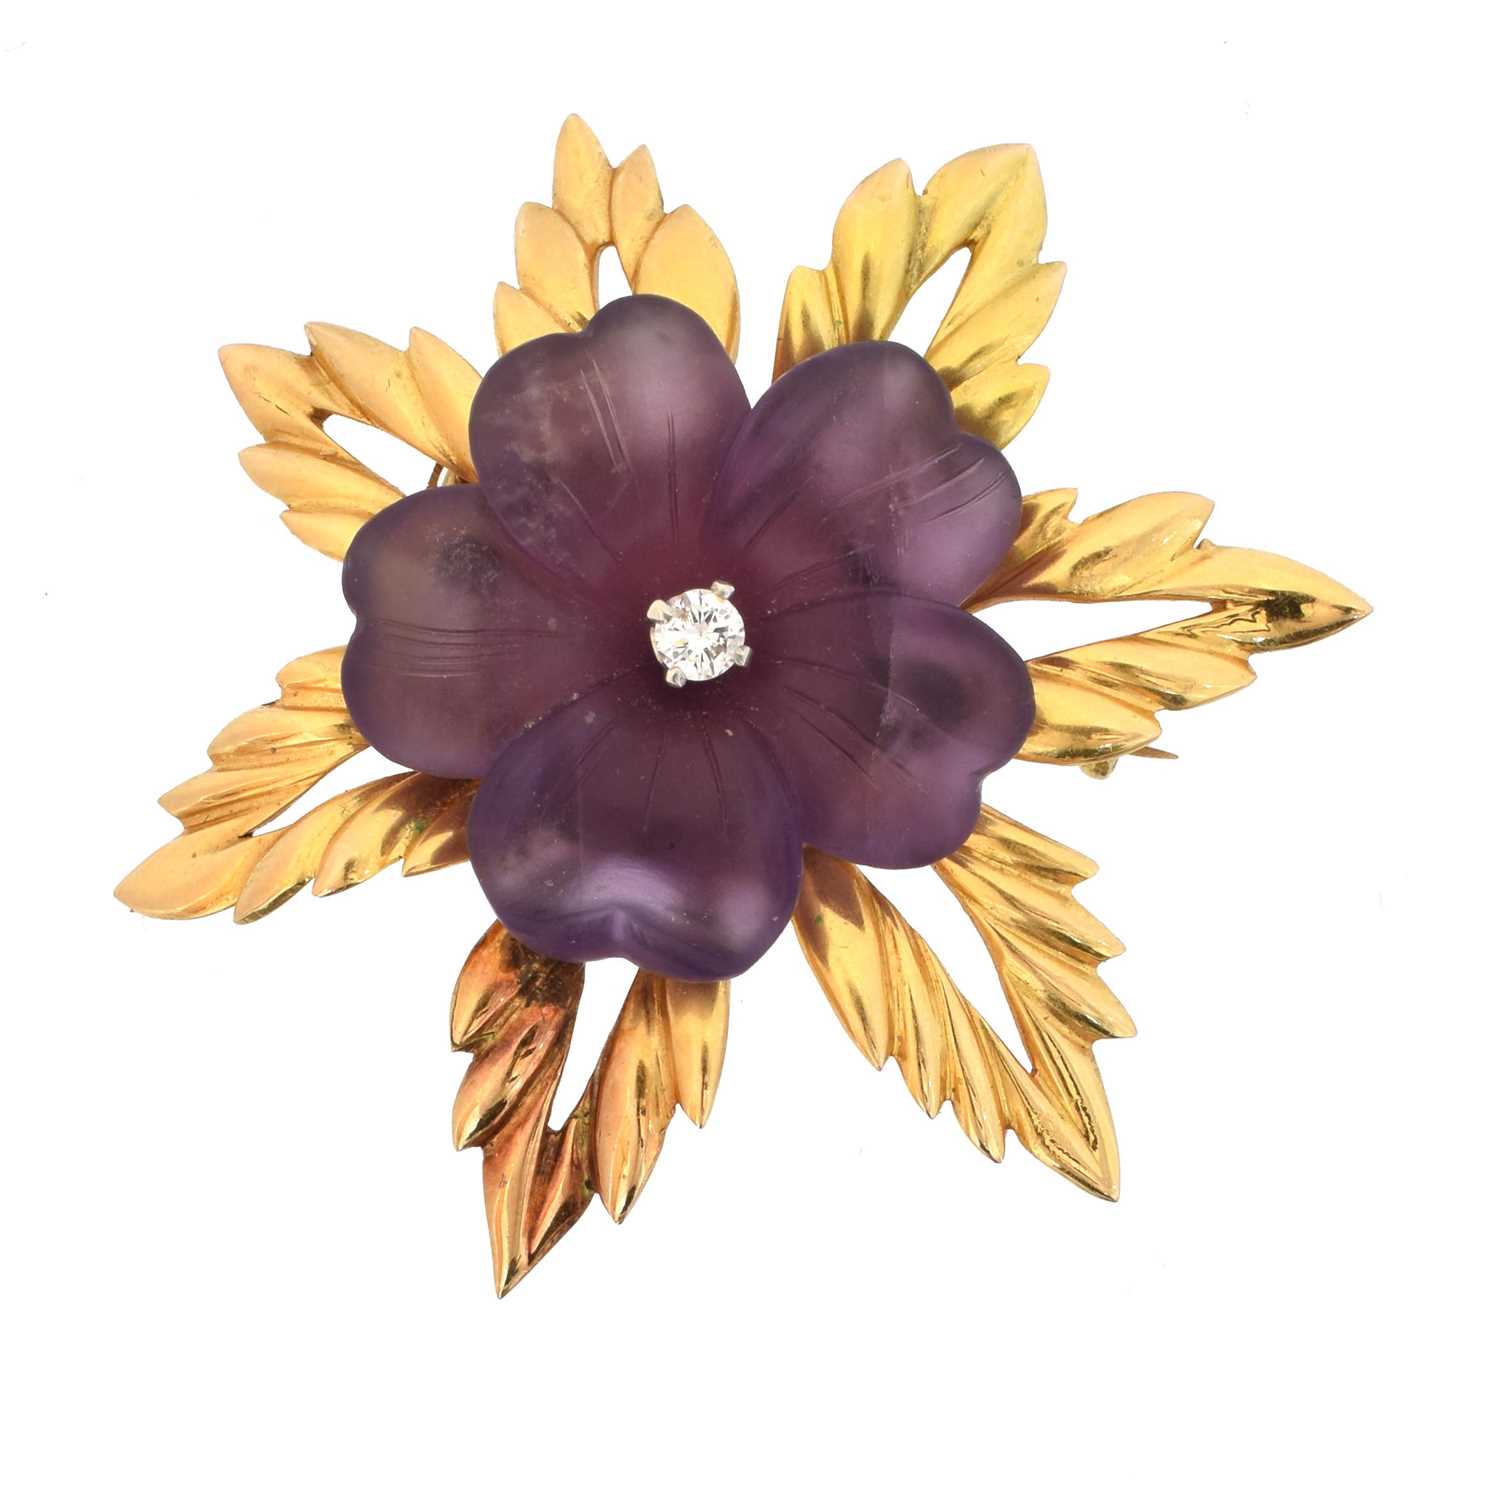 Lot 34 - An 18ct gold amethyst and diamond brooch by Garrard & Co.